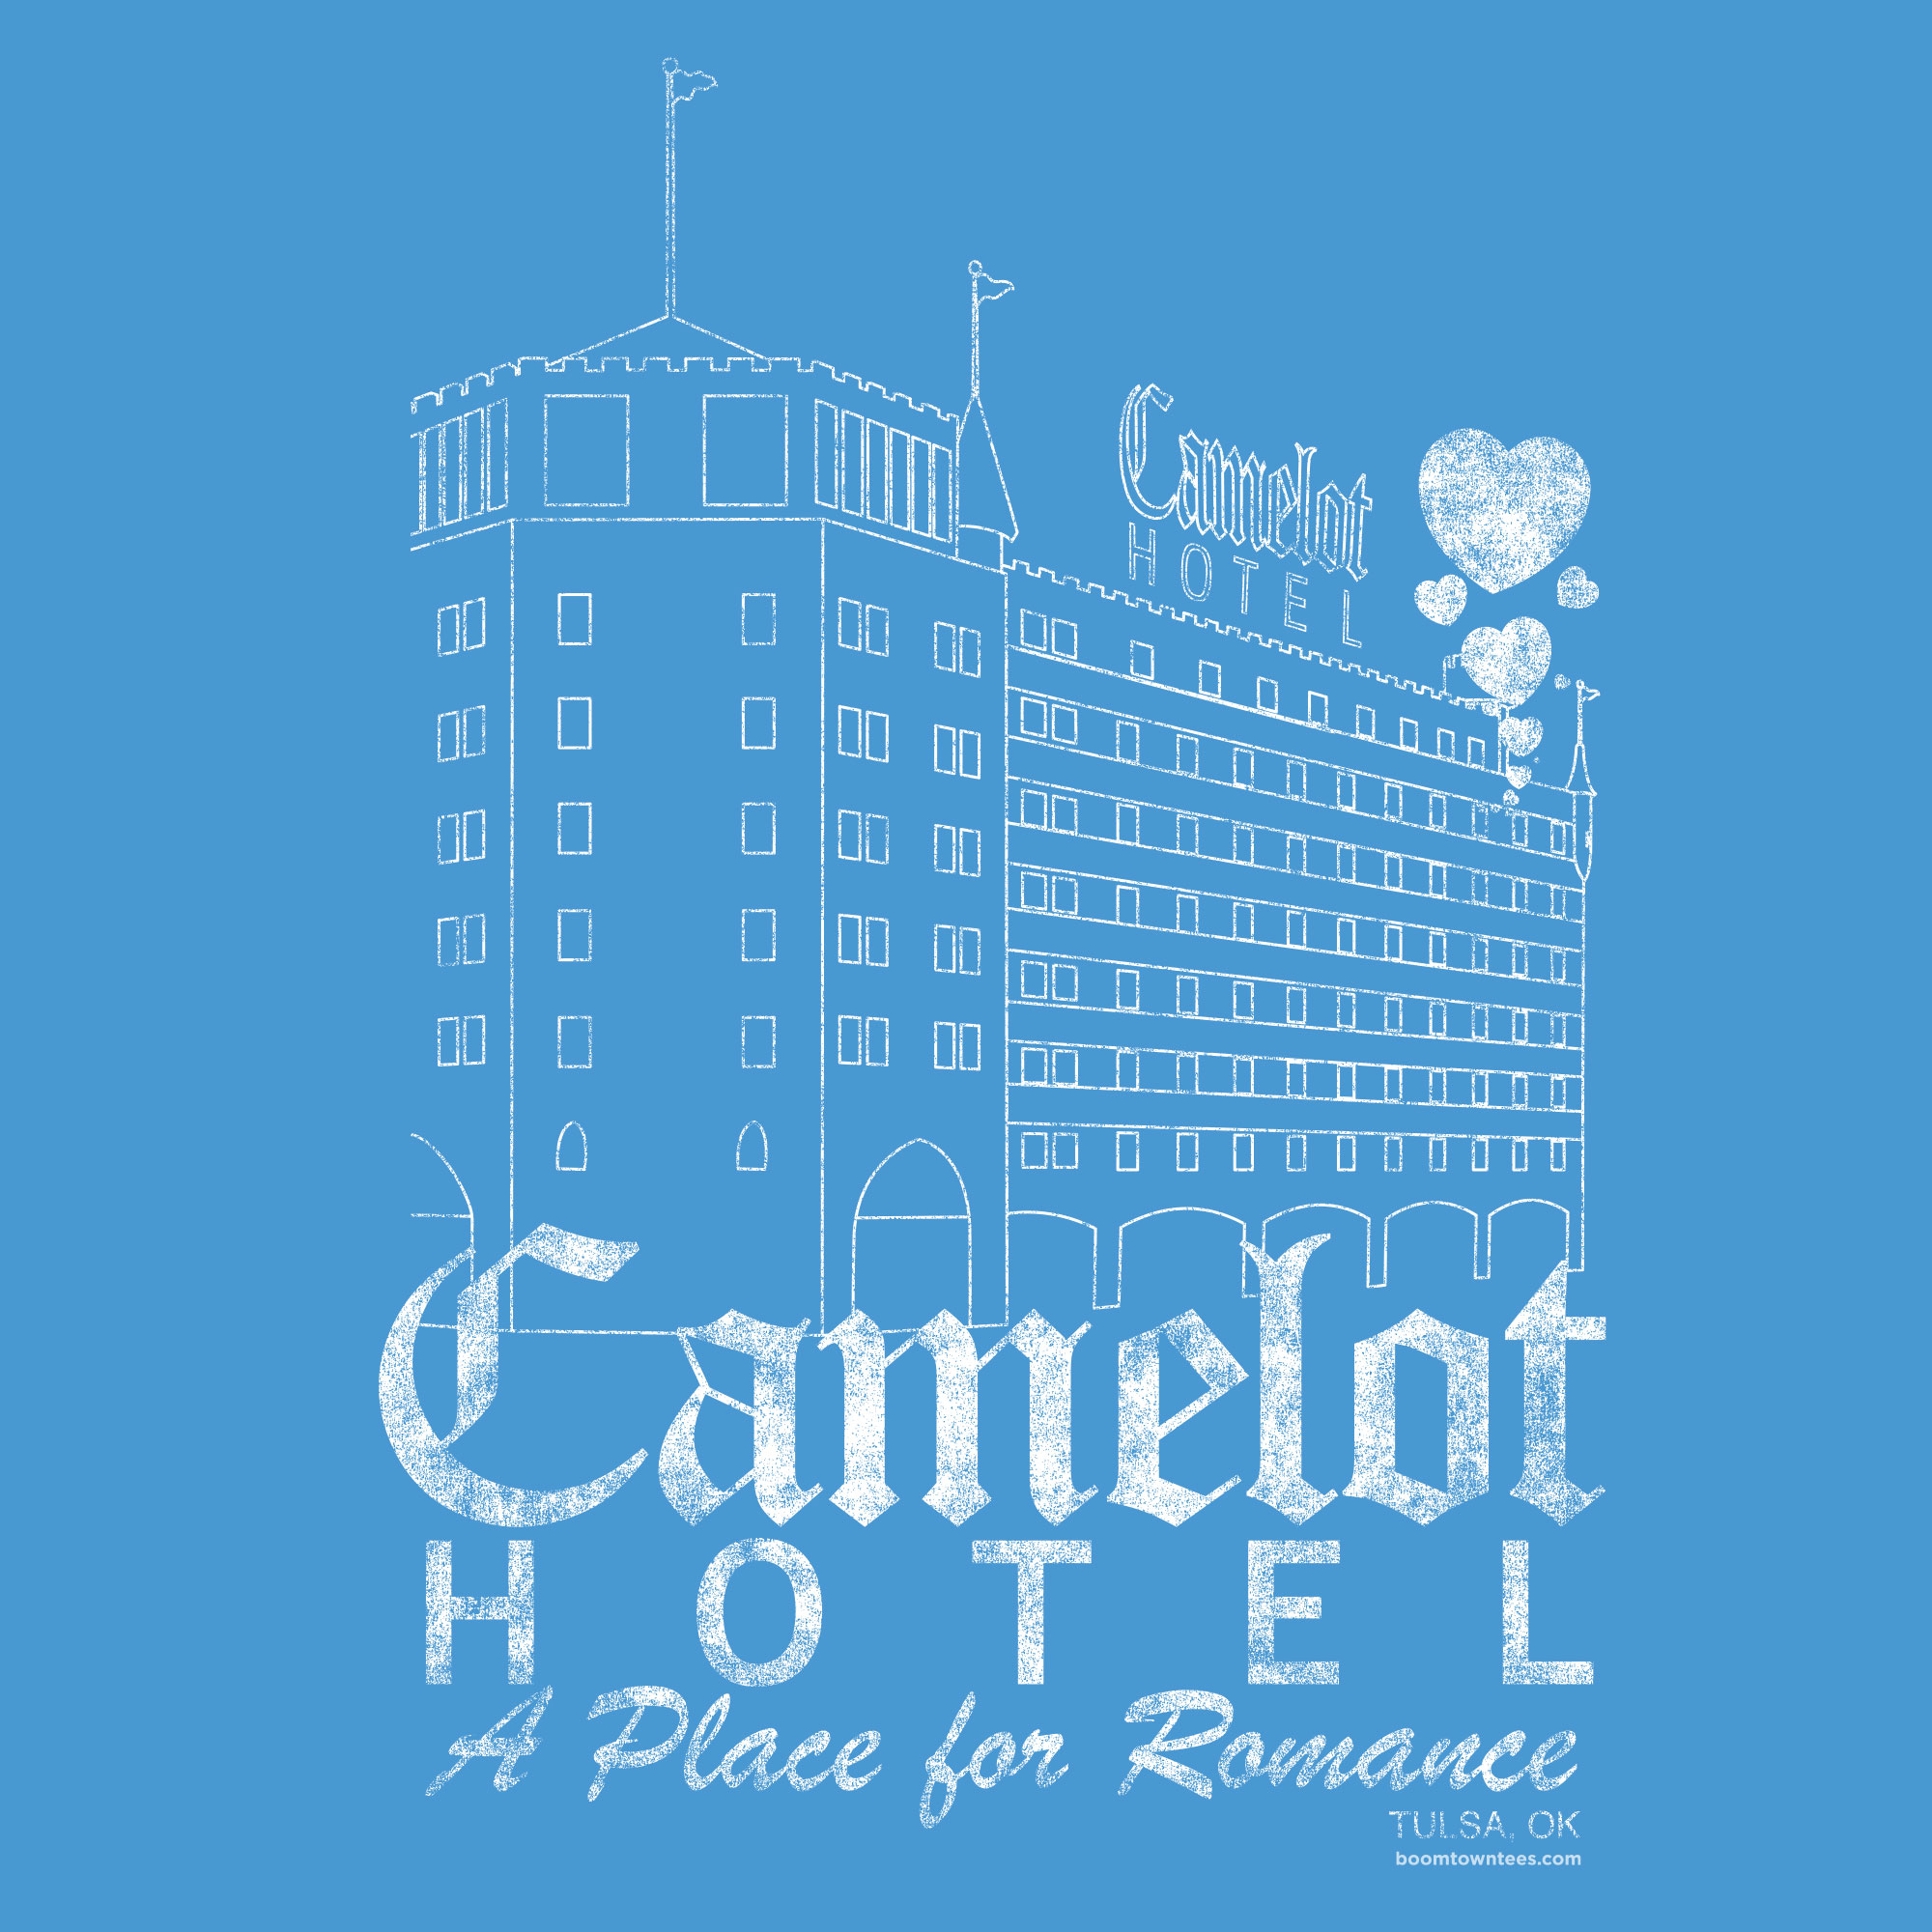 Camelot Hotel Tees